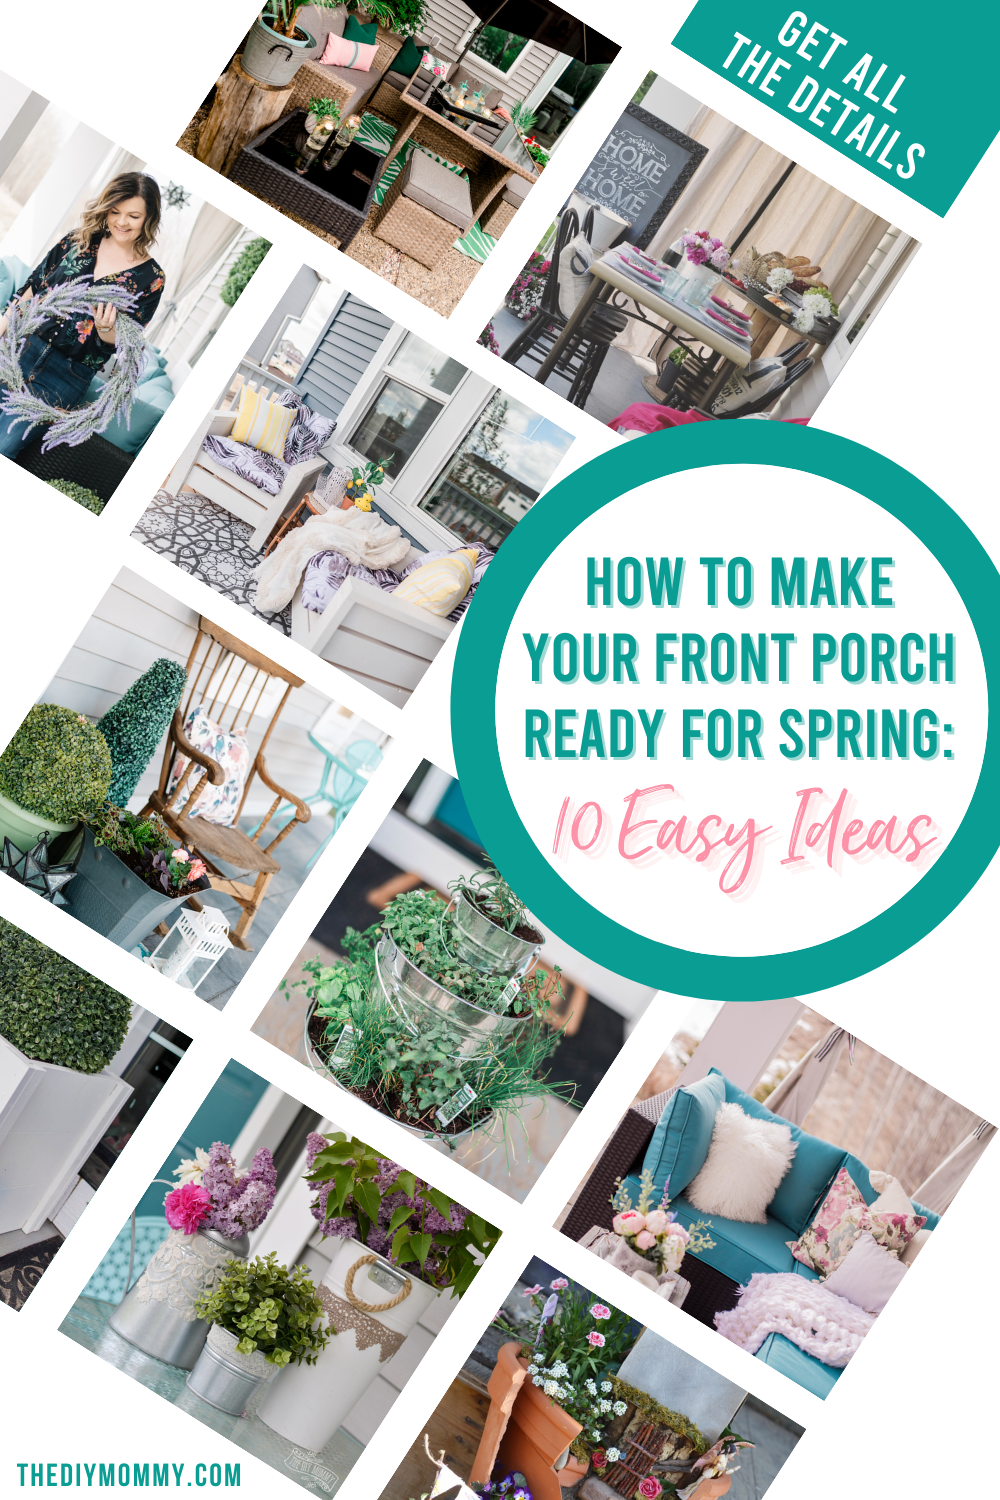 How to Make Your Front Porch Ready for Spring: 10 Easy Ideas